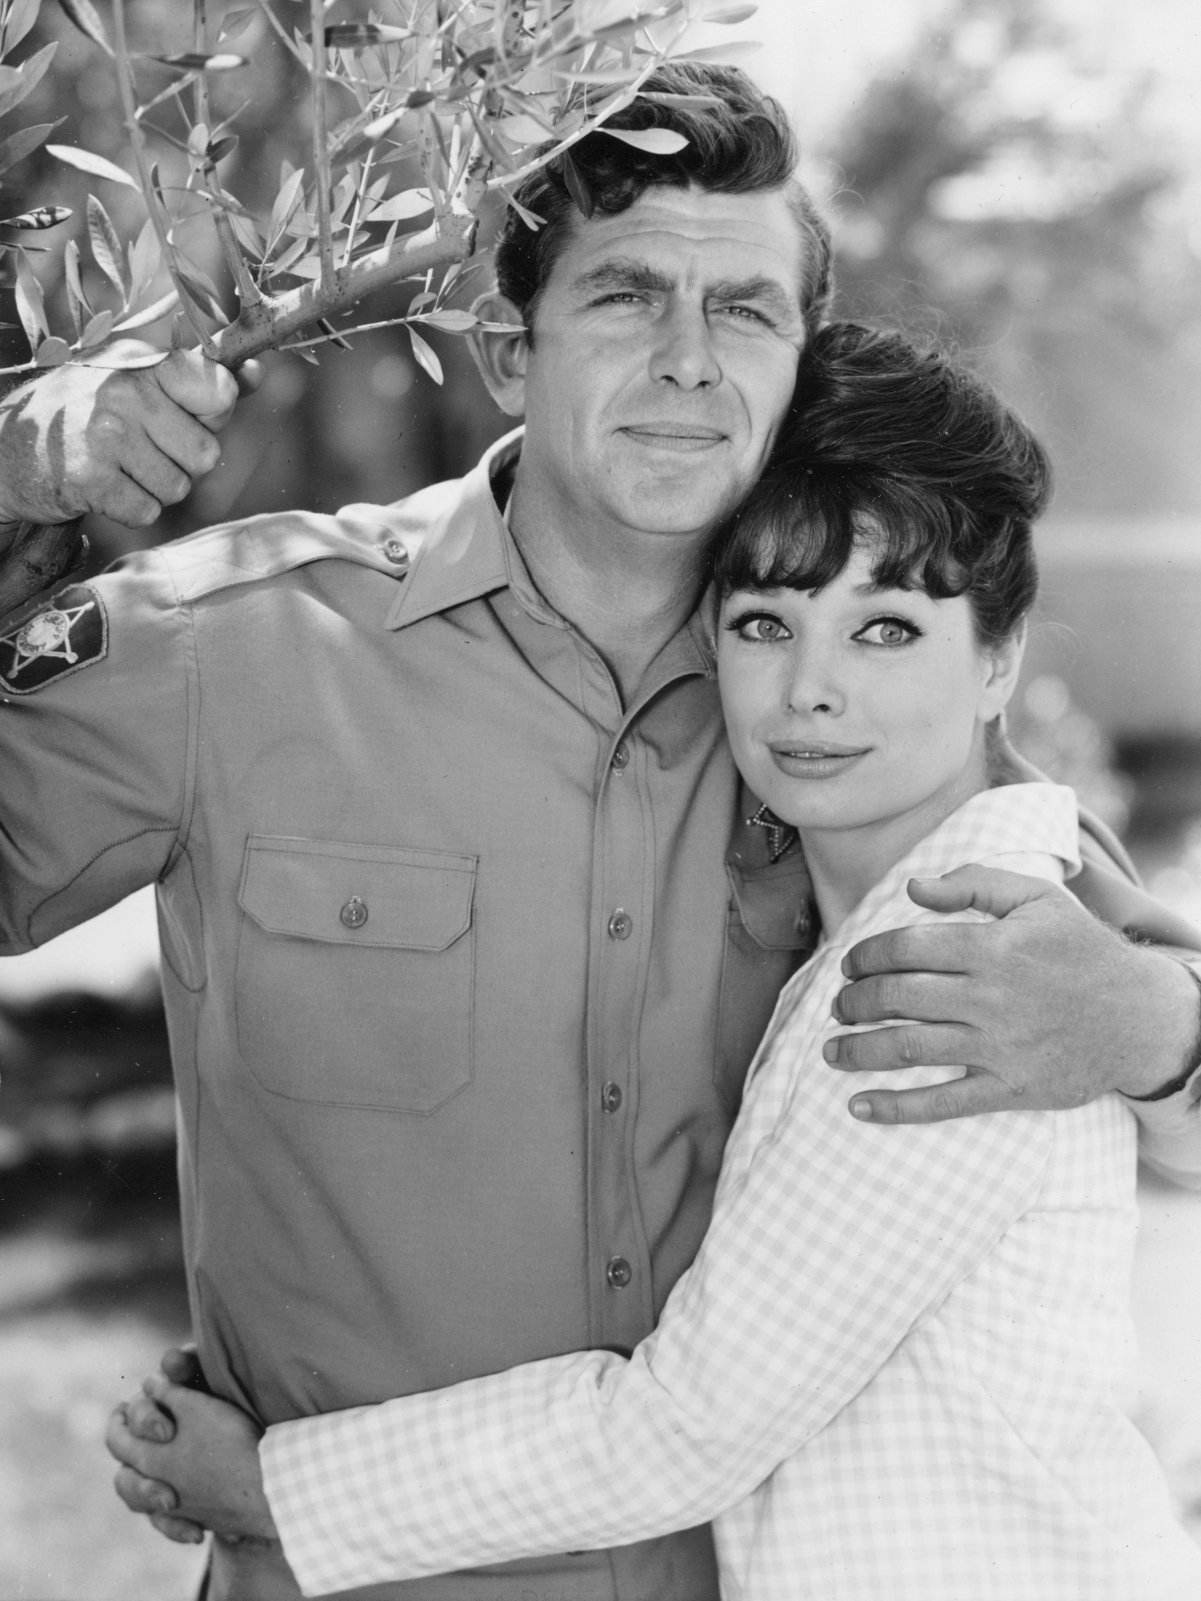 Andy Griffith and Aneta Corsaut of 'The Andy Griffith Show'